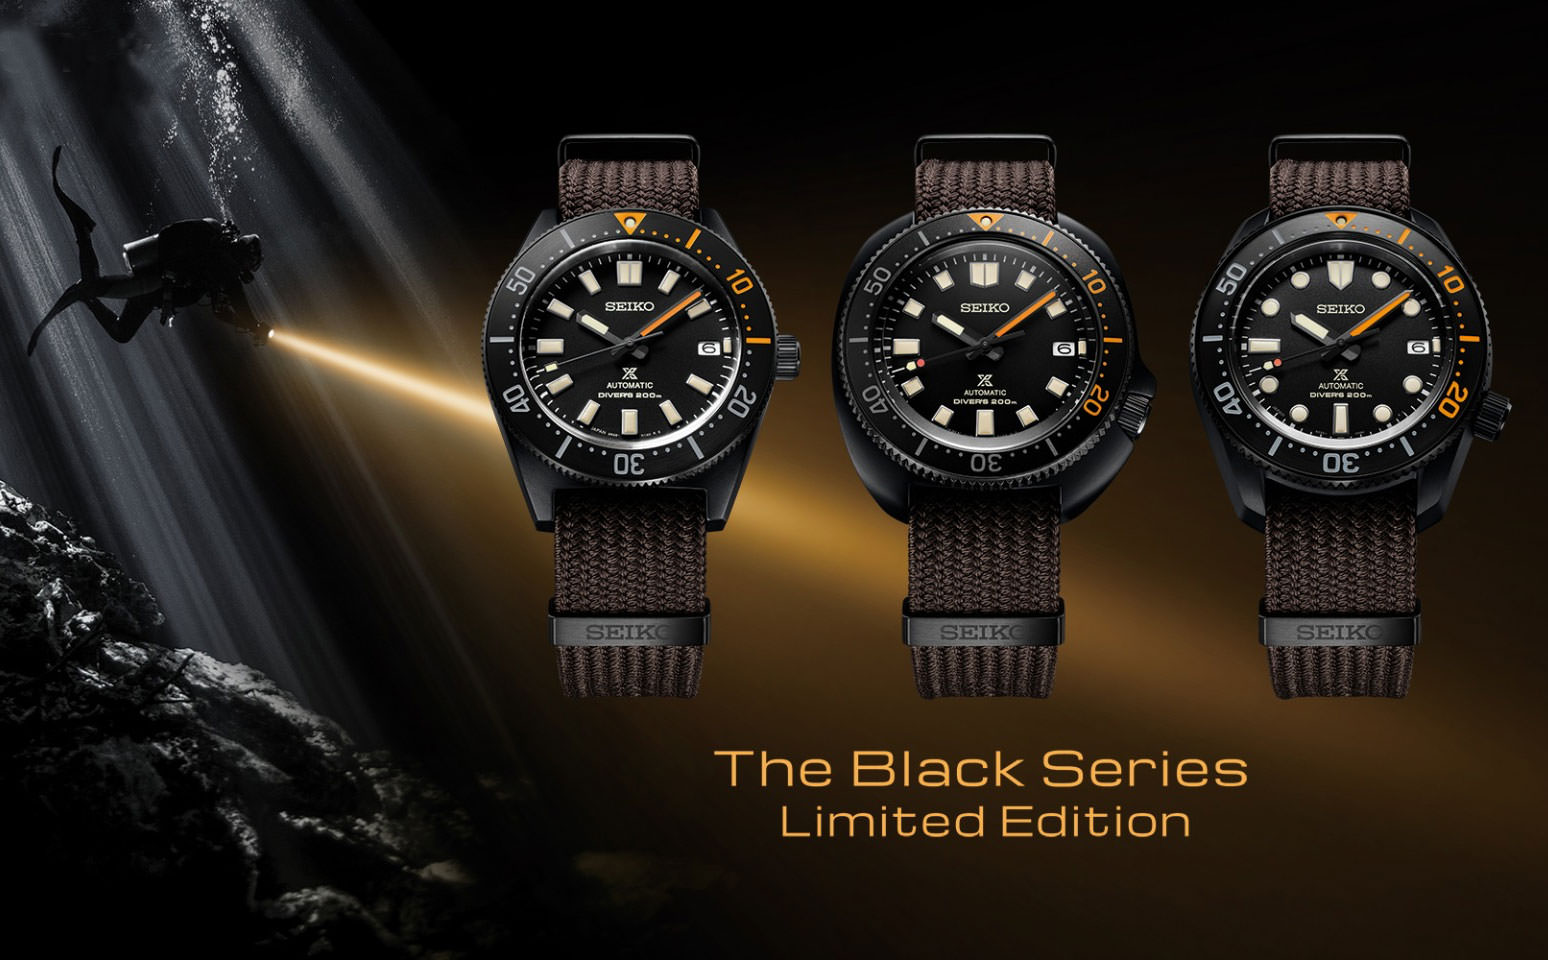 Seiko Prospex Black Series Limited Edition Everything You Need to Know